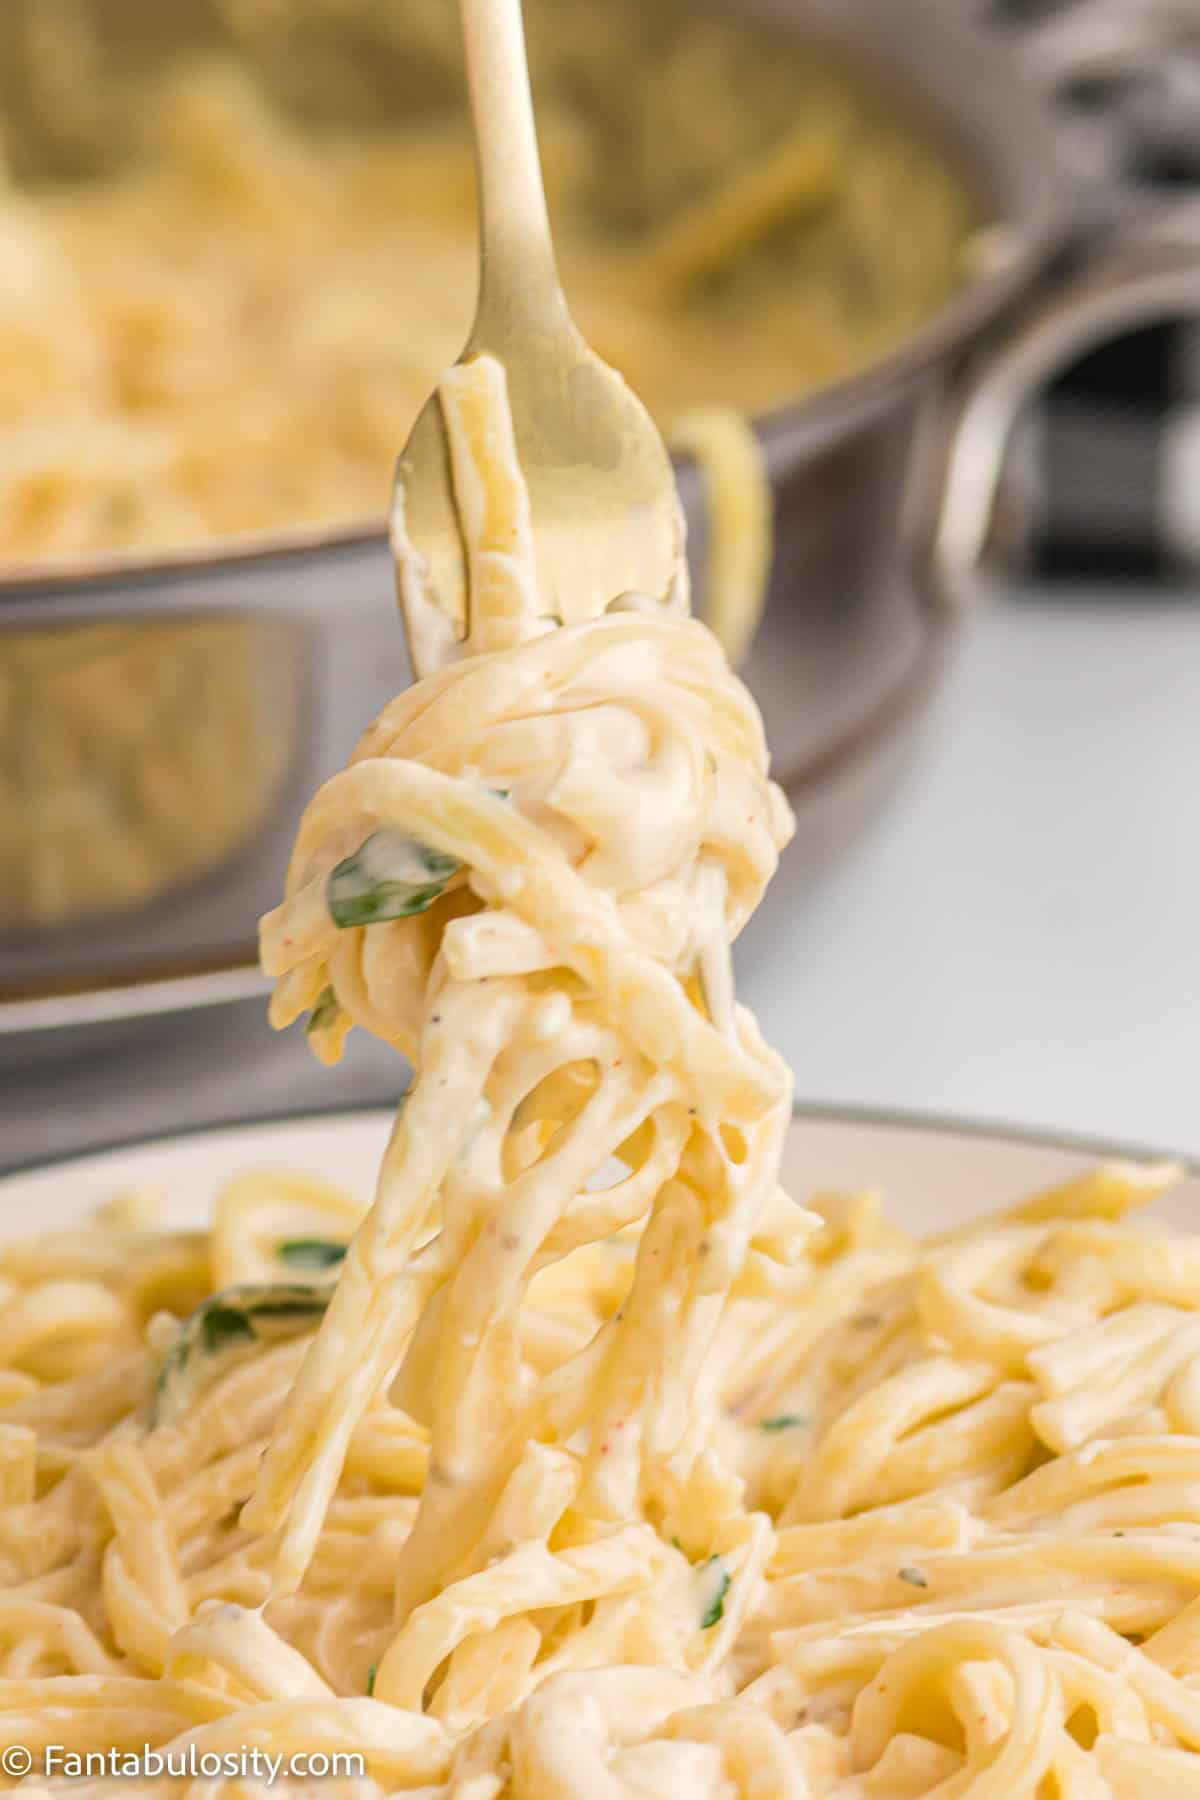 Cream cheese pasta on a plate being scooped up with a fork.